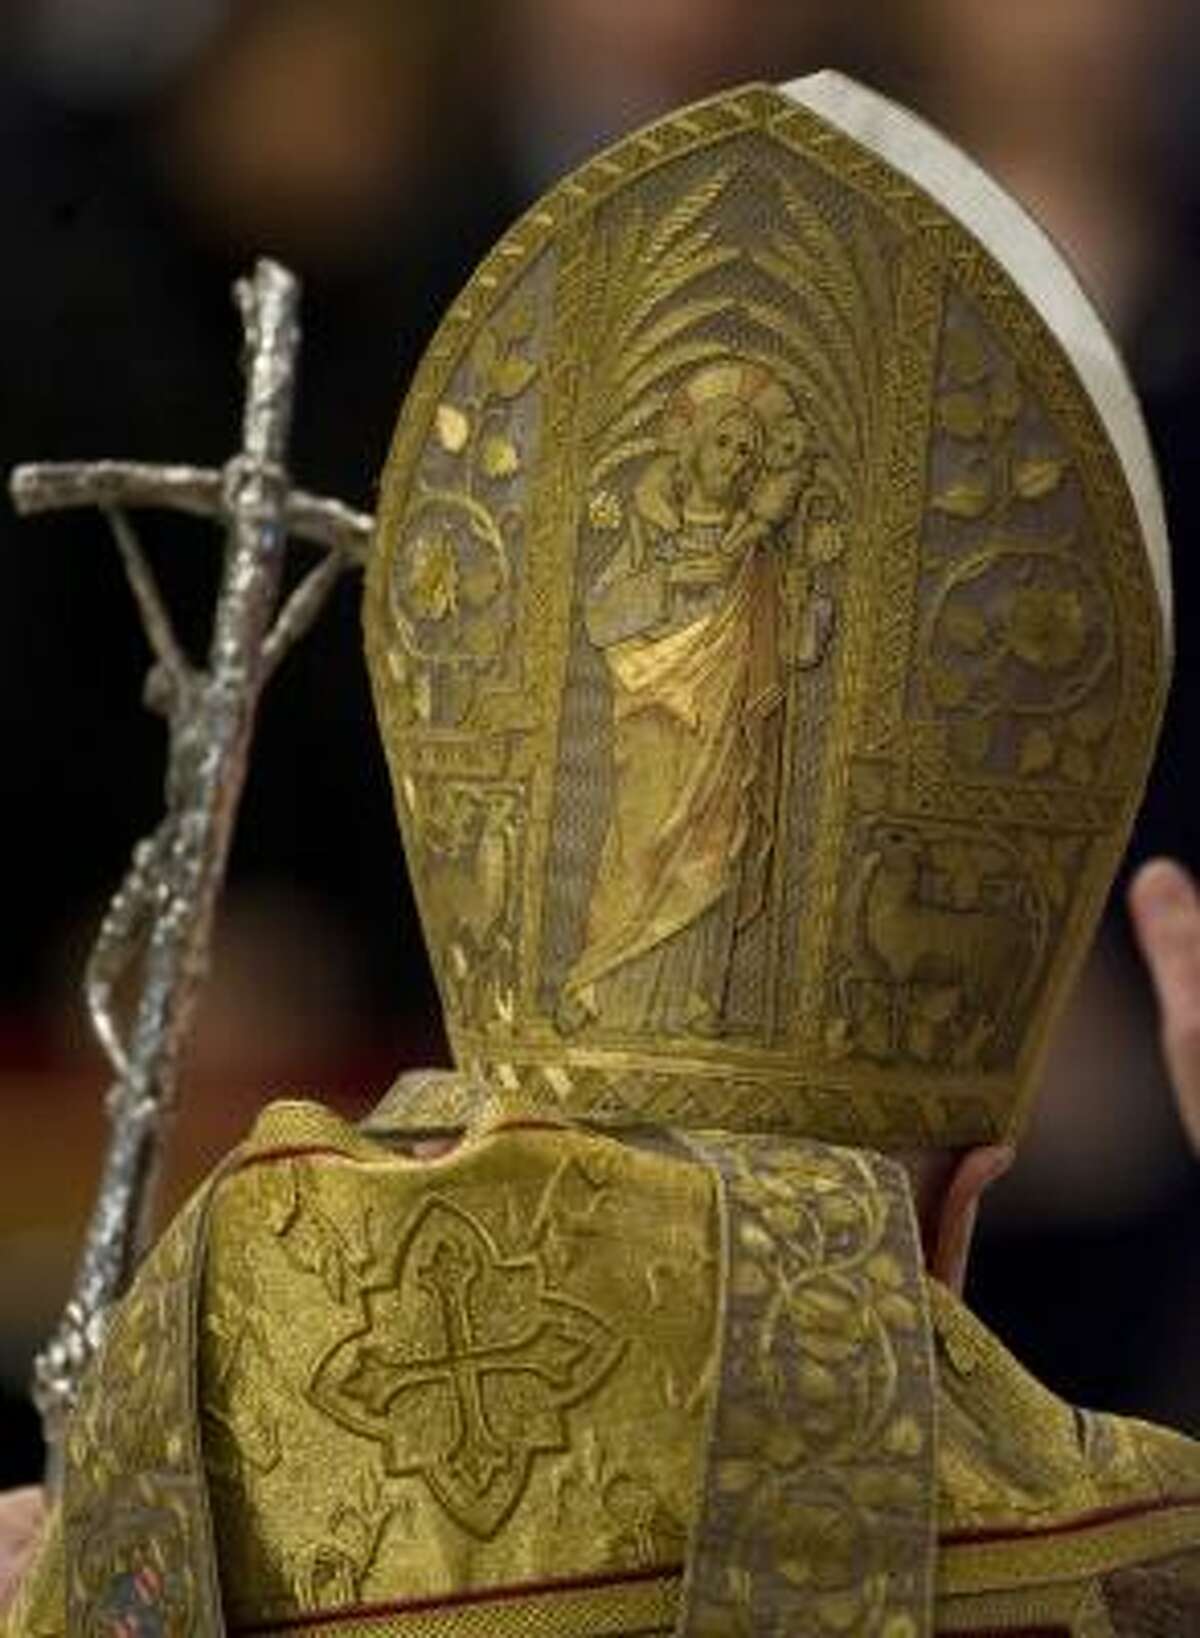 Pope Benedict XVI's choice of garments displays his traditional and elaborate sense of style.